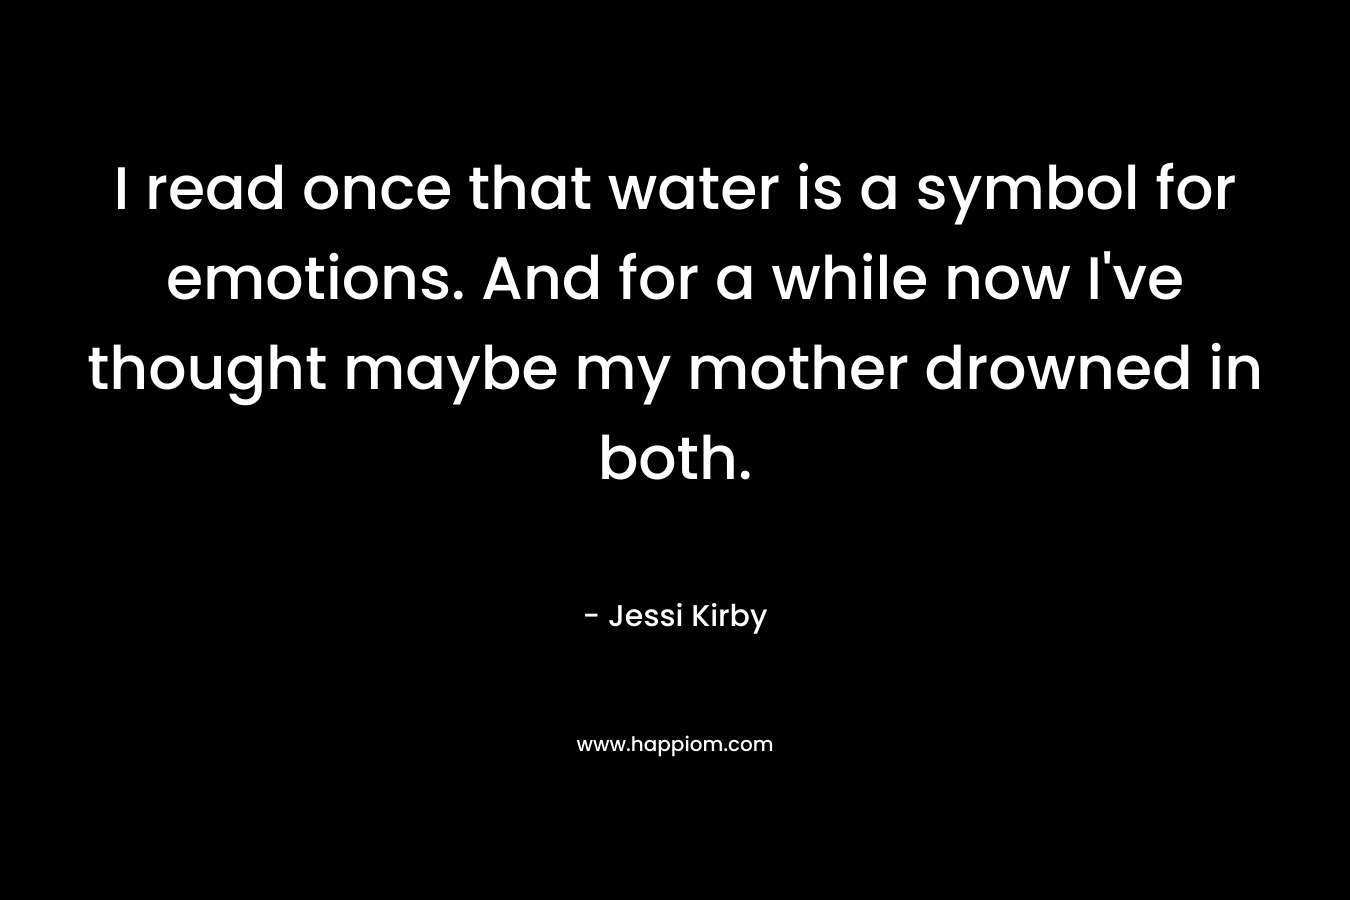 I read once that water is a symbol for emotions. And for a while now I’ve thought maybe my mother drowned in both. – Jessi Kirby